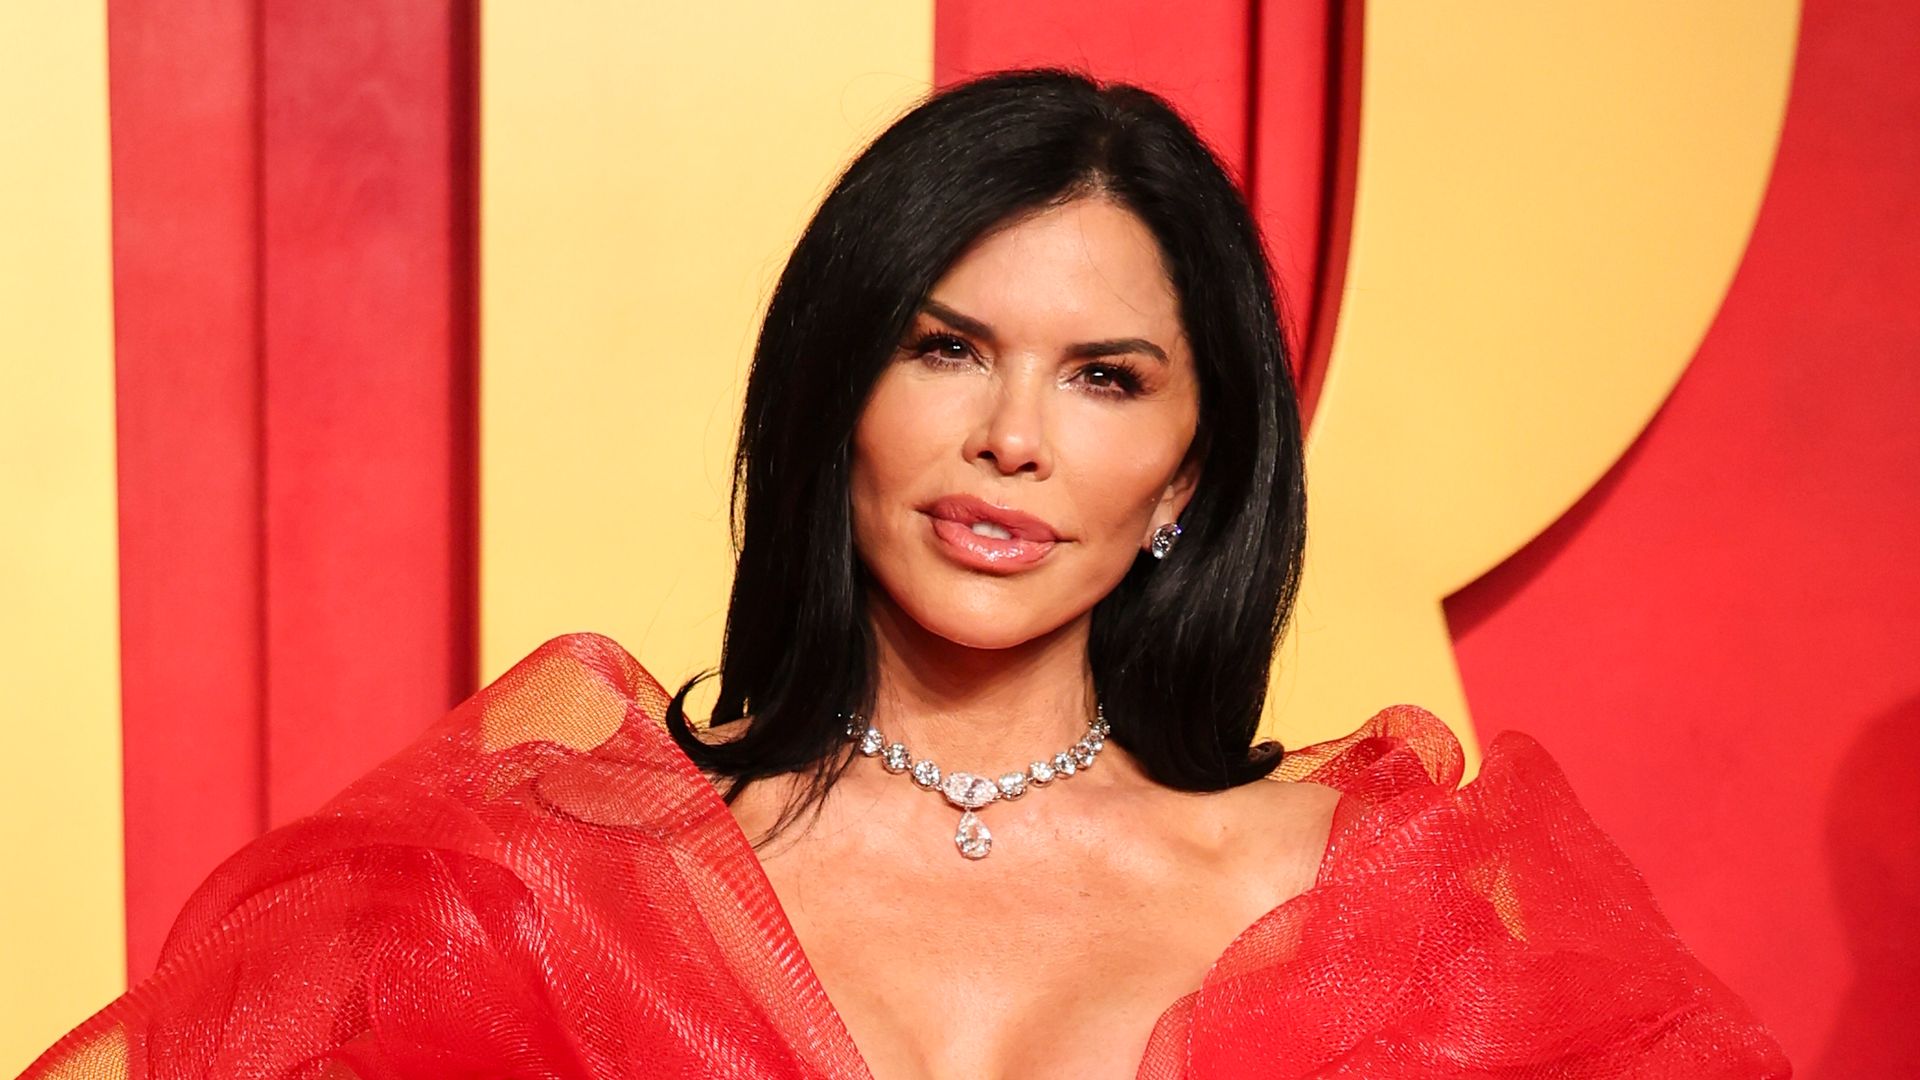 Lauren Sanchez shares childhood photo as she opens up about difficult diagnosis: 'I was scared'